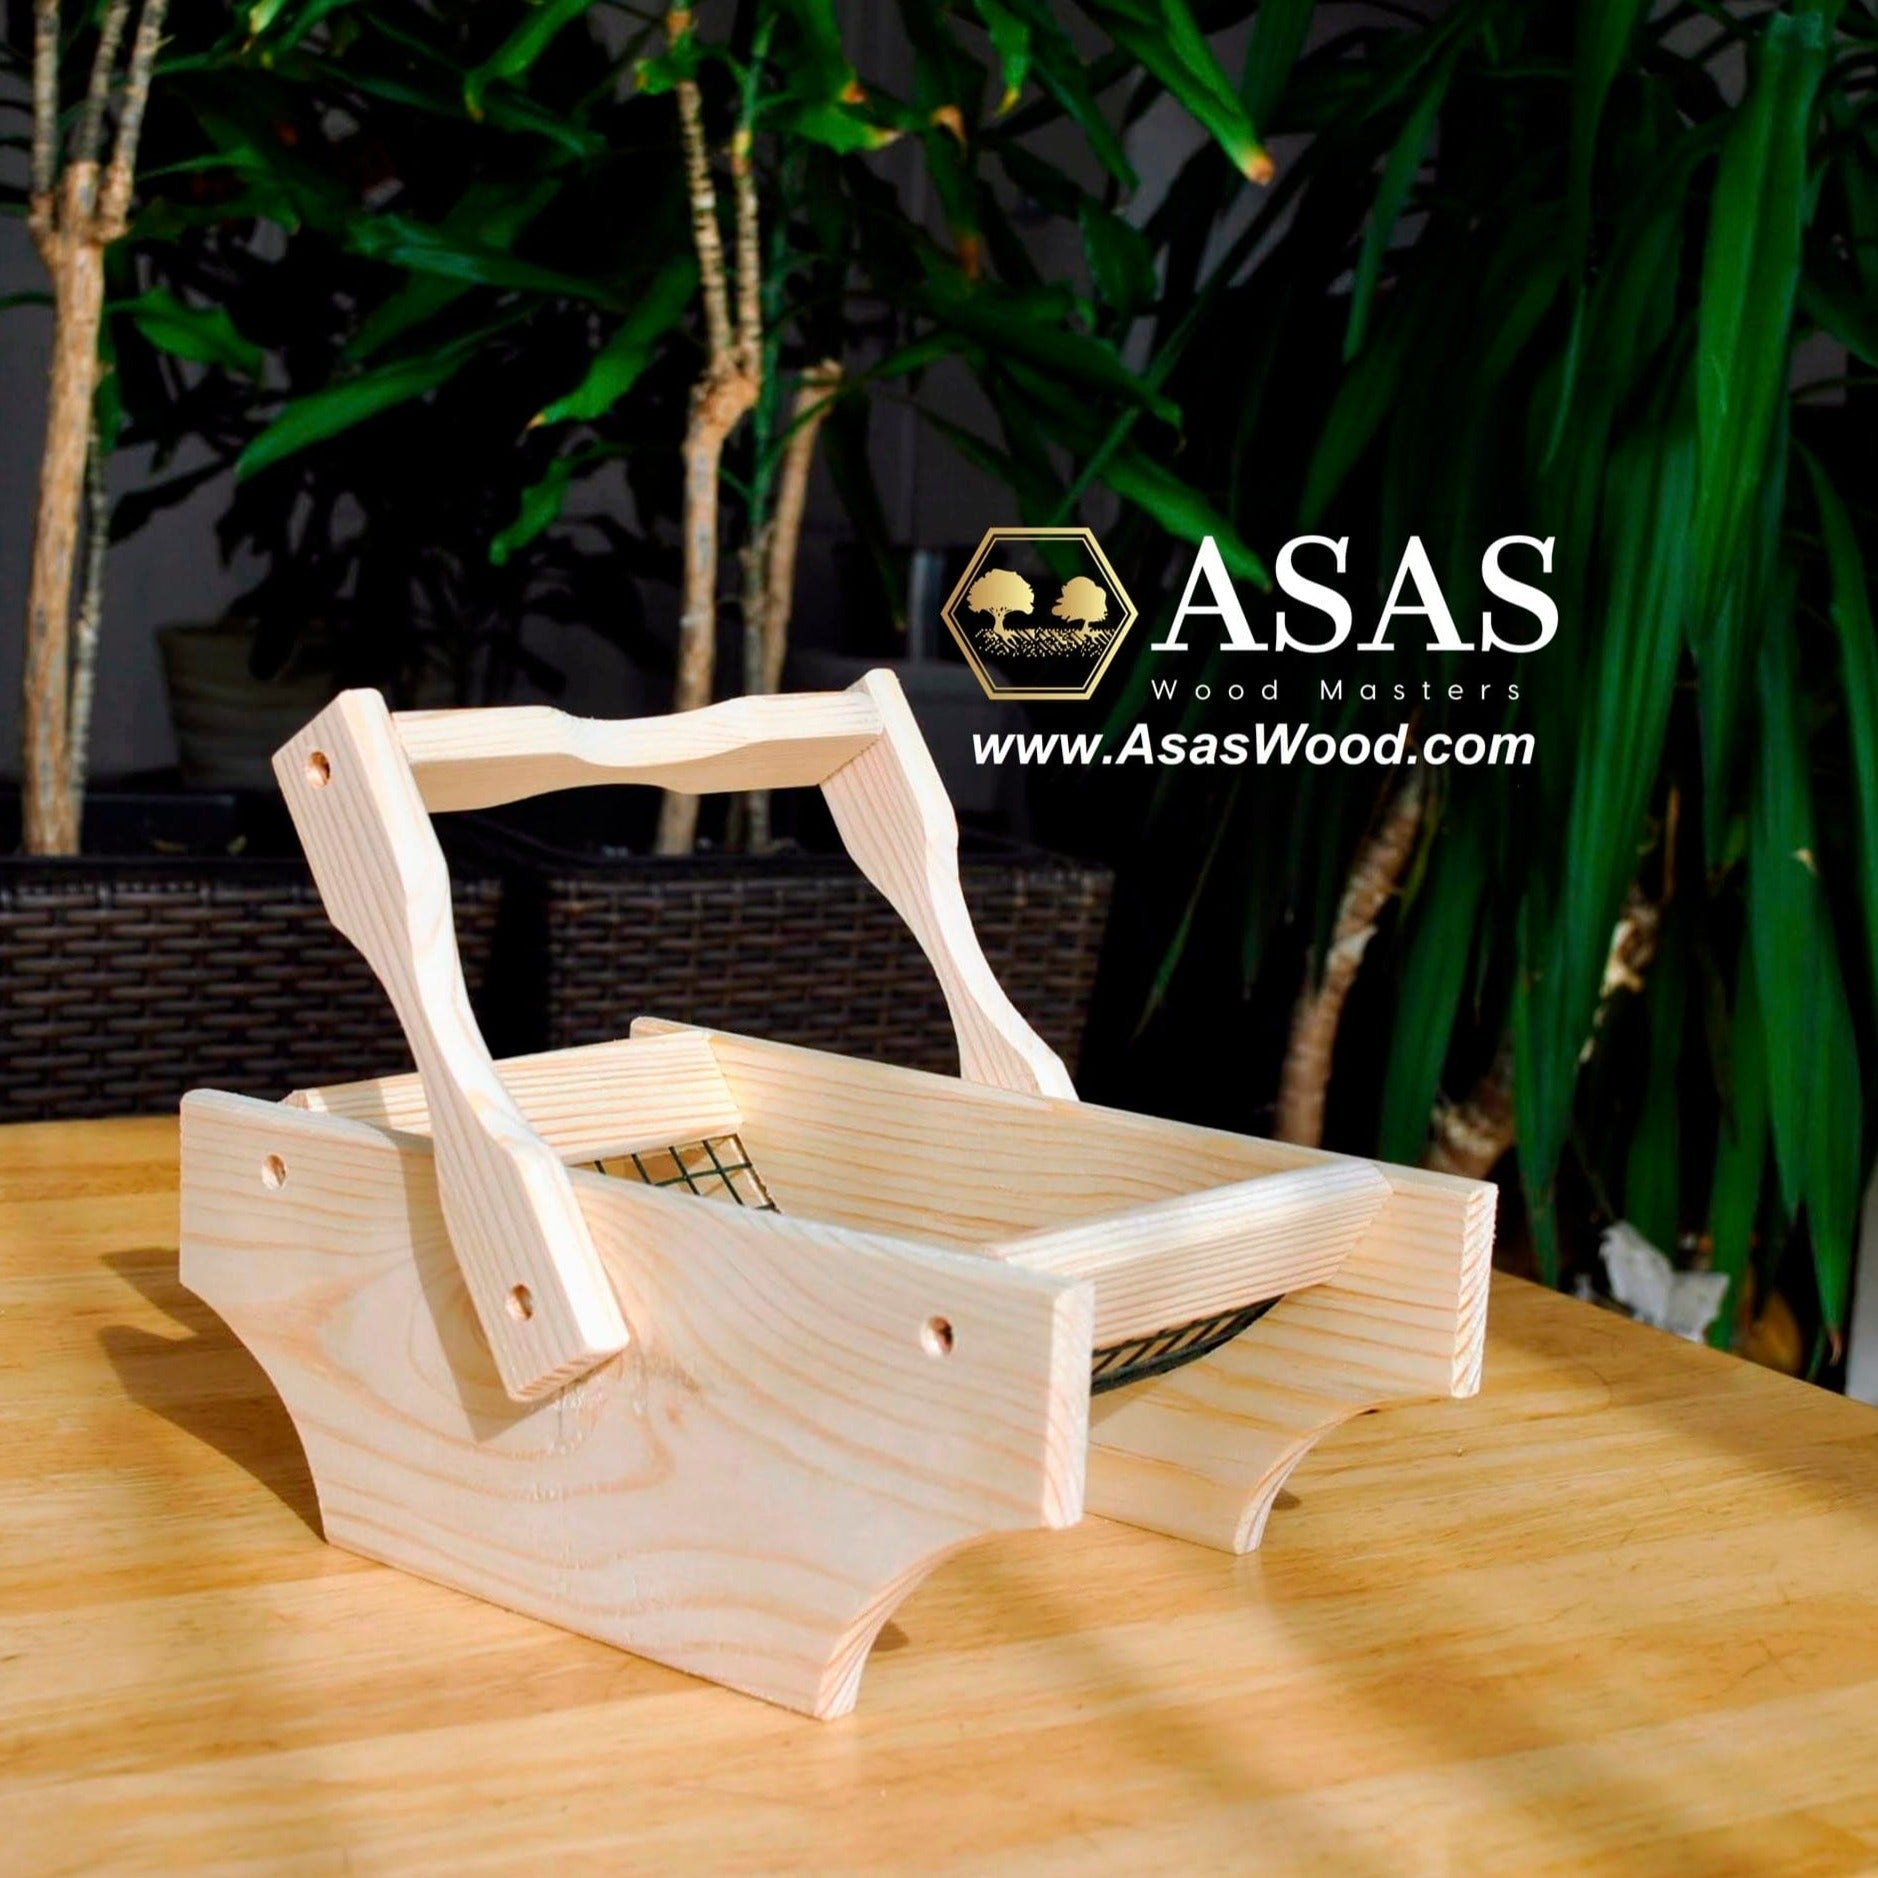 Egg basket, wooden, handmade, Made by AsasWood